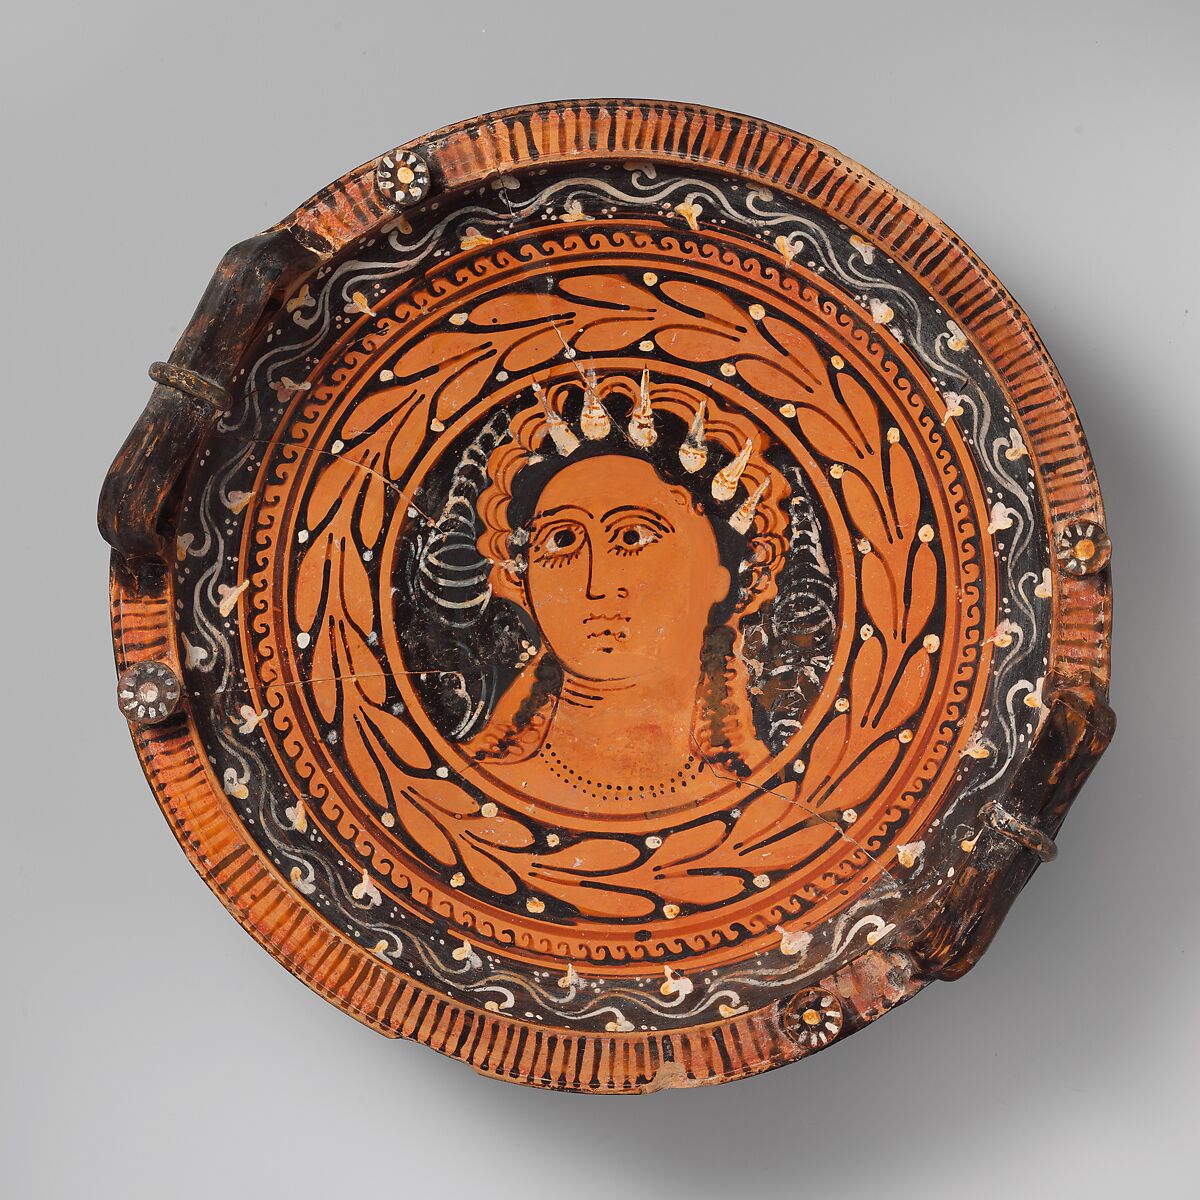 Terracotta lekanis (dish), Close in style to the Baltimore Painter, Terracotta, Greek, South Italian, Apulian 